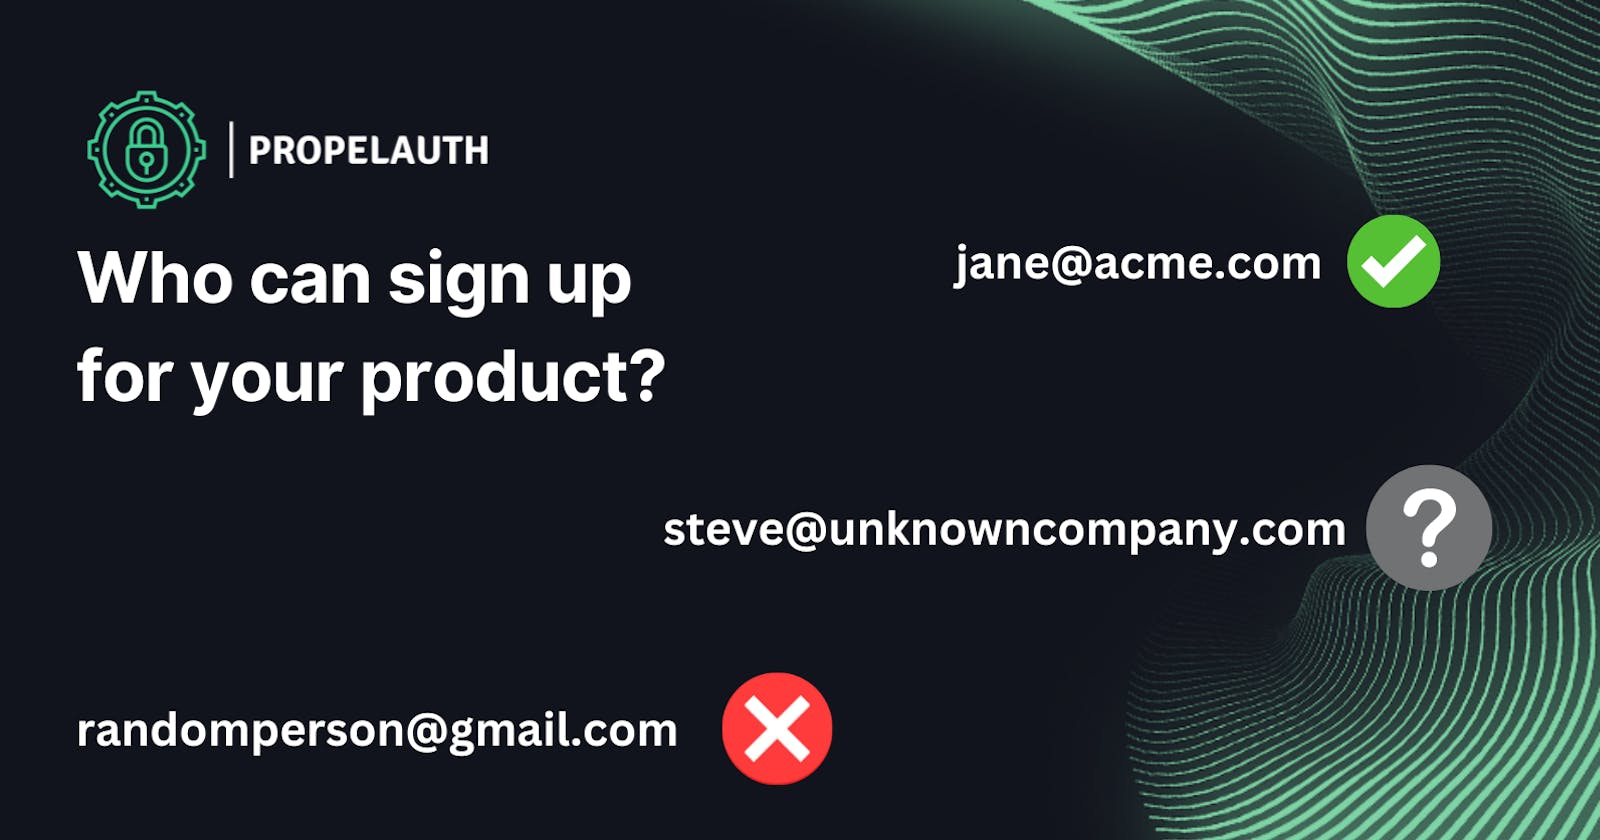 Who can sign up for your product?